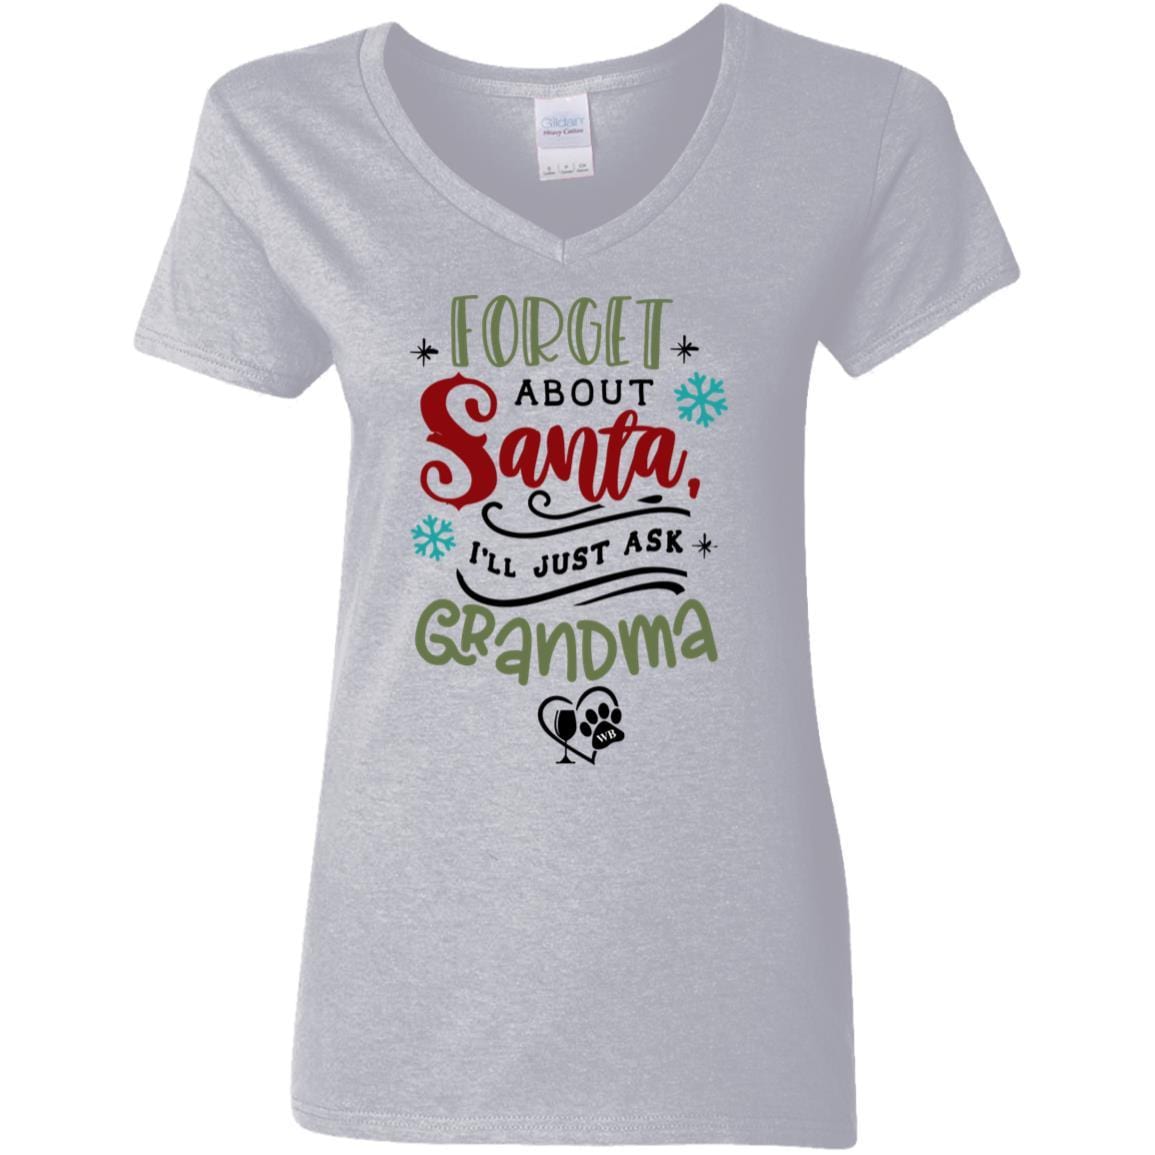 T-Shirts Sport Grey / S WineyBitches.Co " Forget About Santa, I'll Just Ask Grandma" Ladies' 5.3 oz. V-Neck T-Shirt WineyBitchesCo